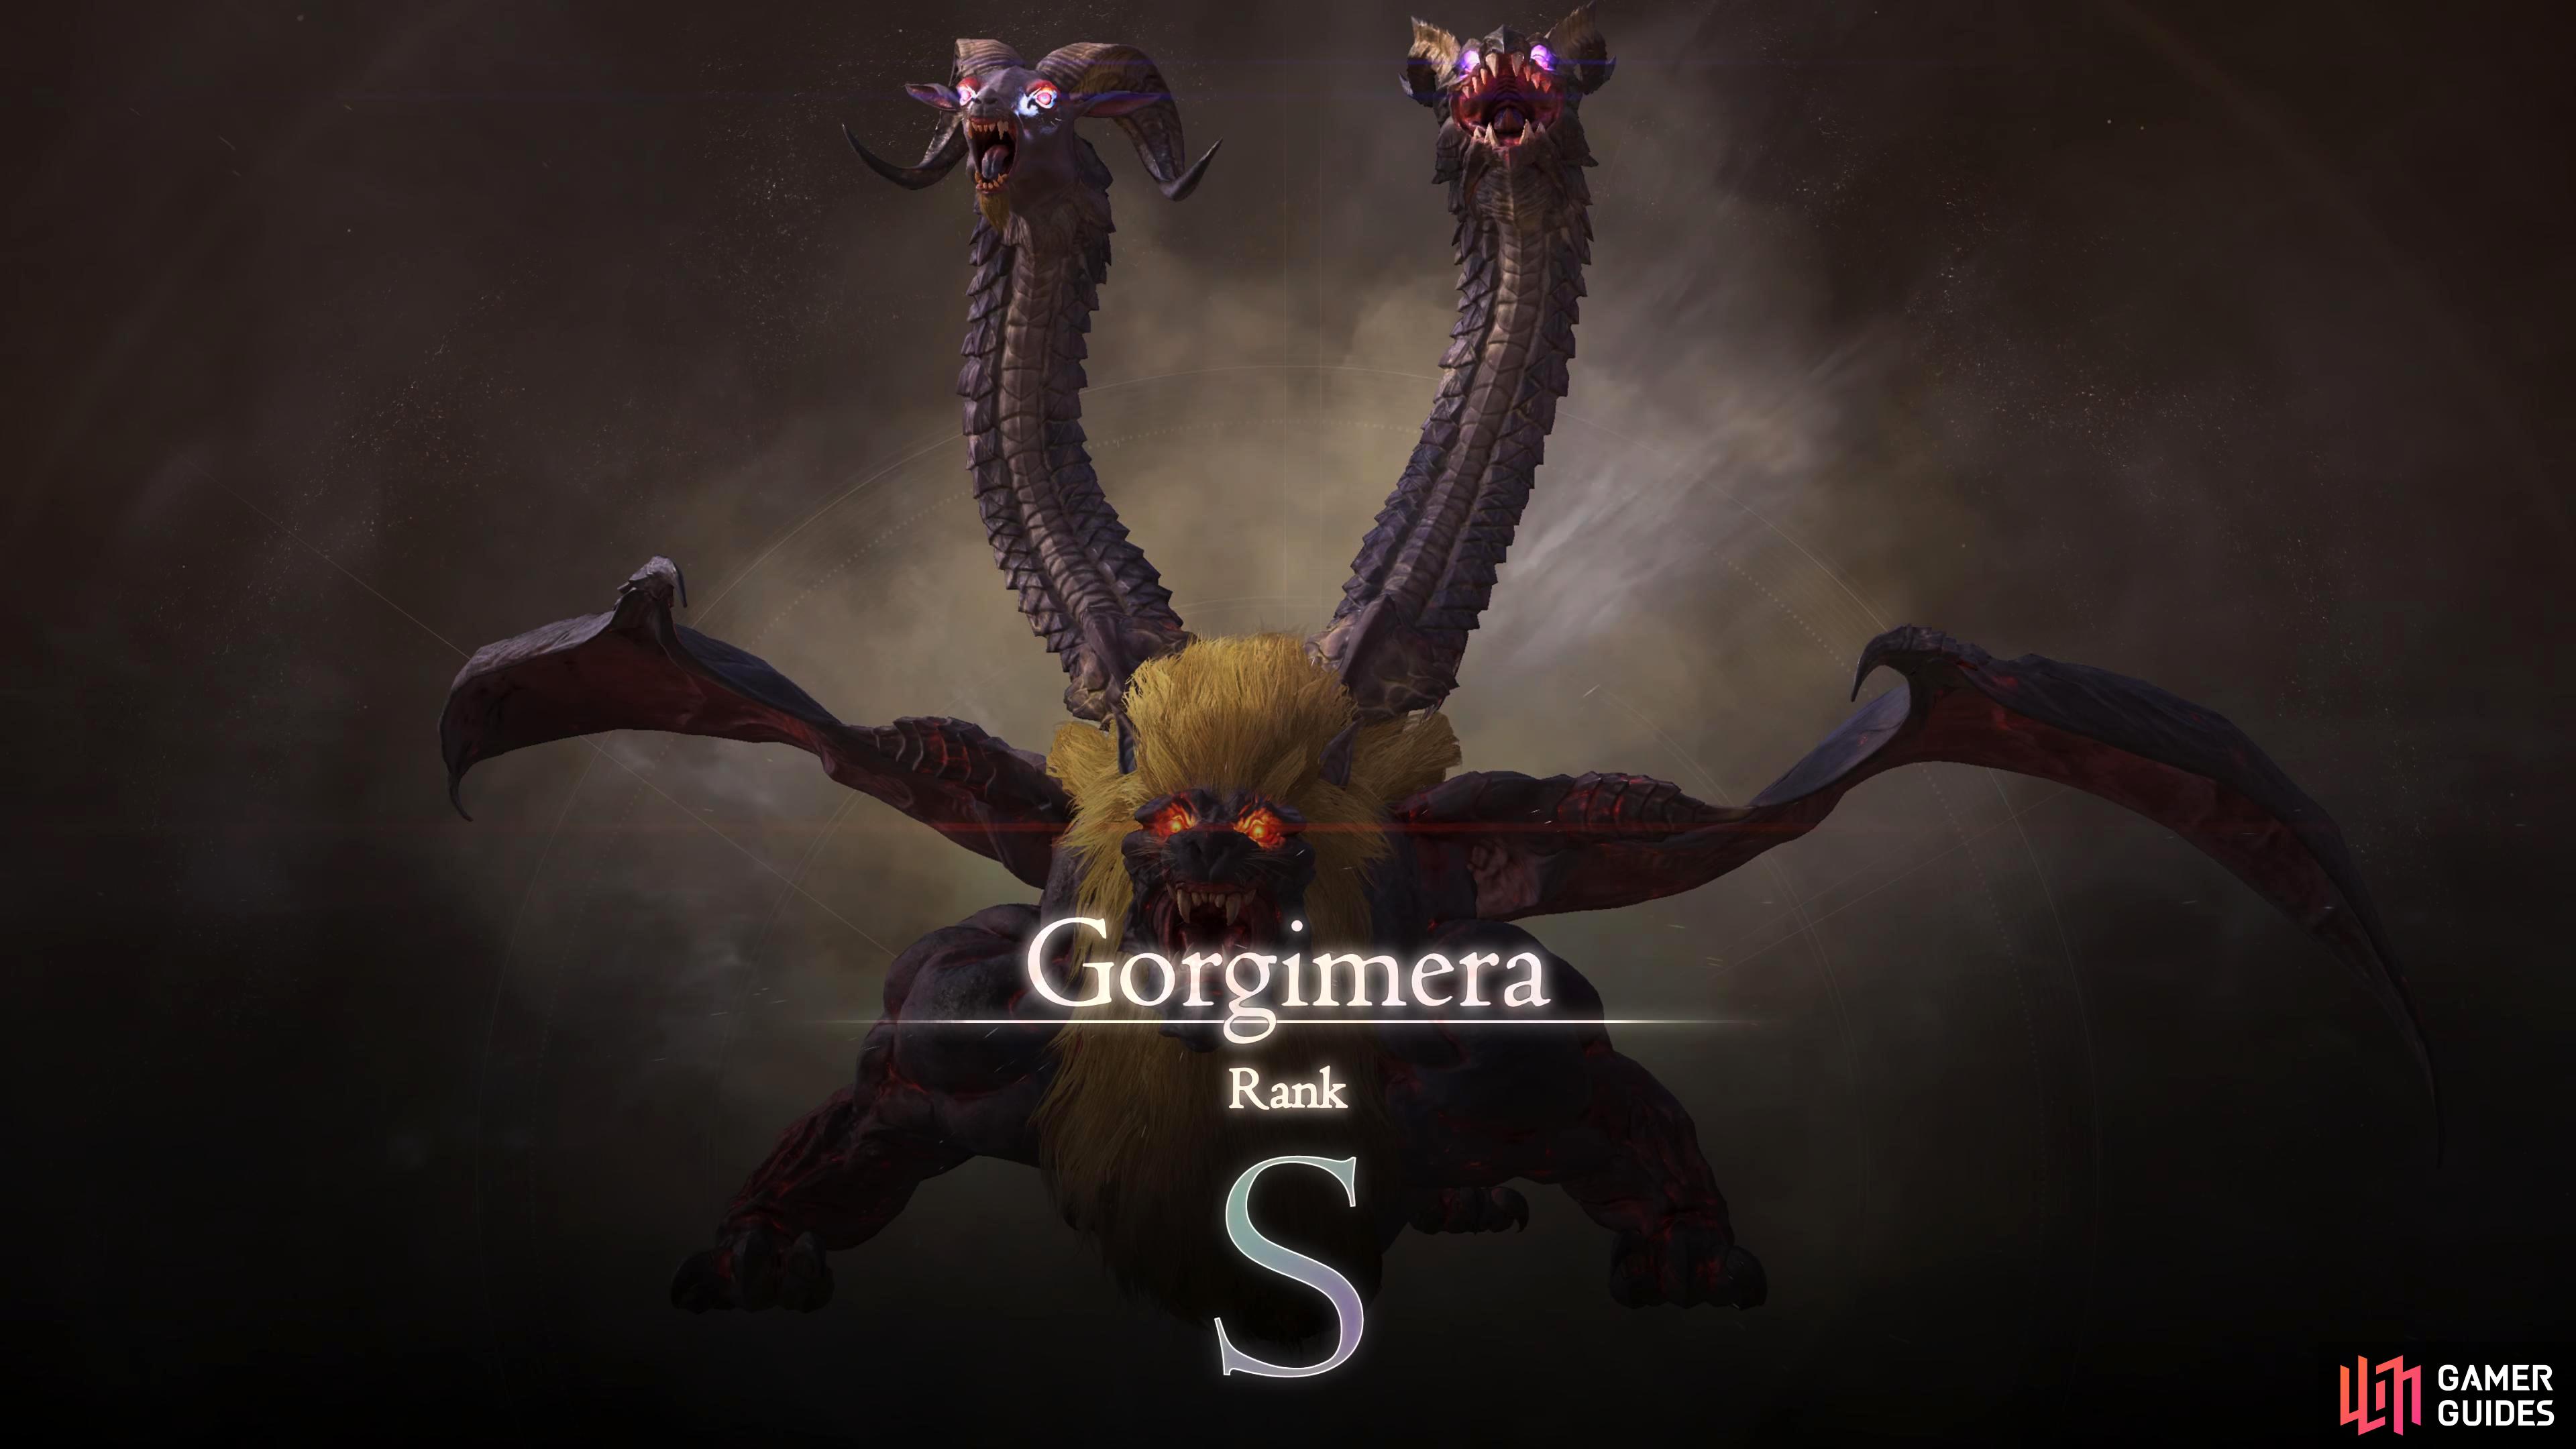 Gorgimera is an S-Rank accessed during the “Across the Narrow” main scenario quest.